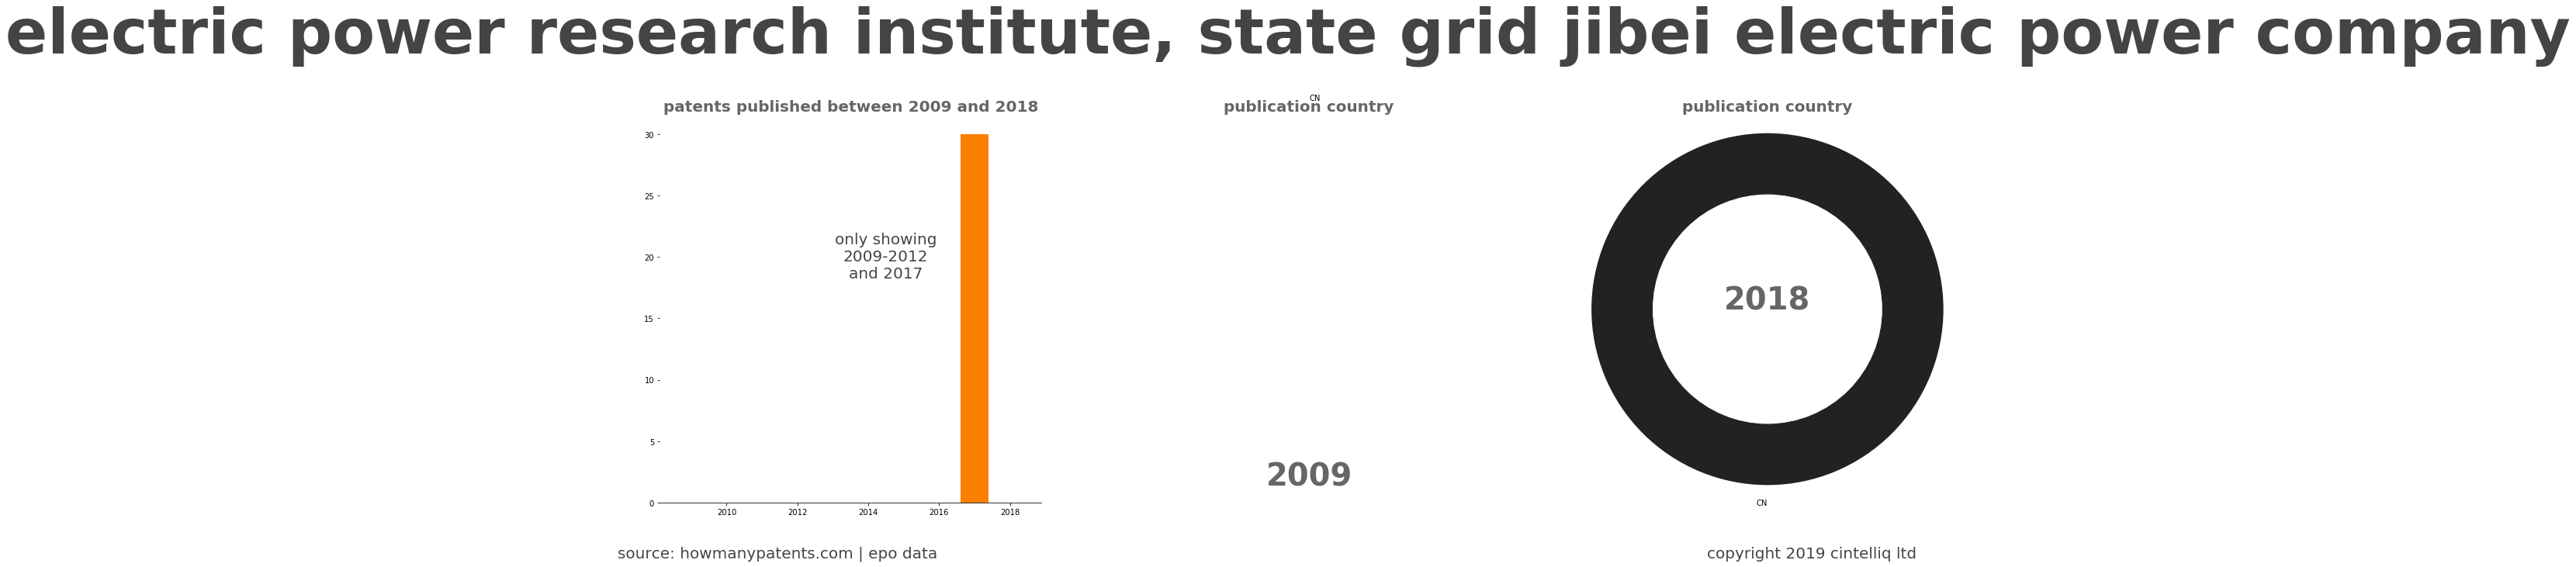 summary of patents for Electric Power Research Institute, State Grid Jibei Electric Power Company